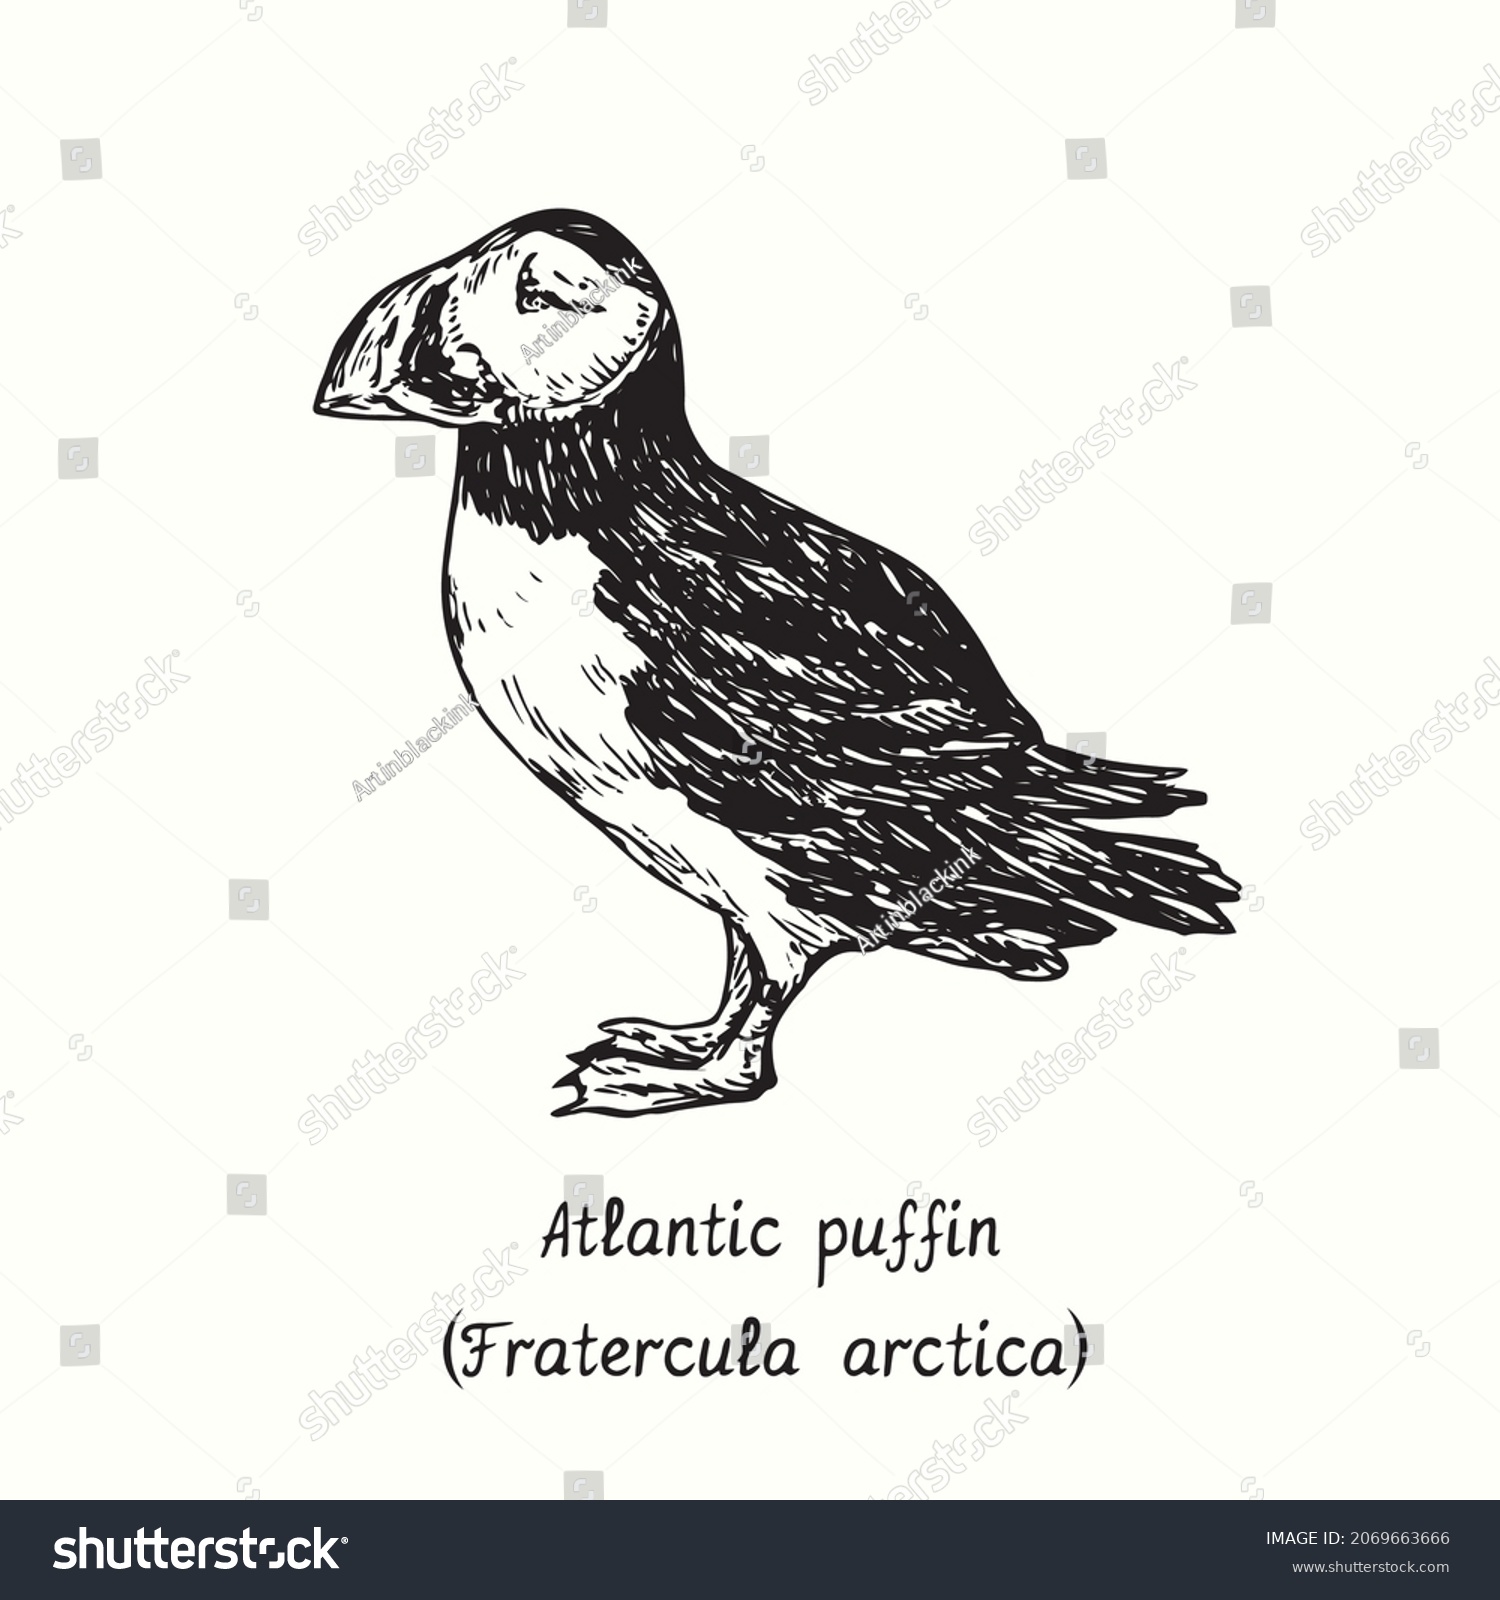 SVG of Atlantic puffin (Fratercula arctica) standing side view. Ink black and white doodle drawing in woodcut style. svg